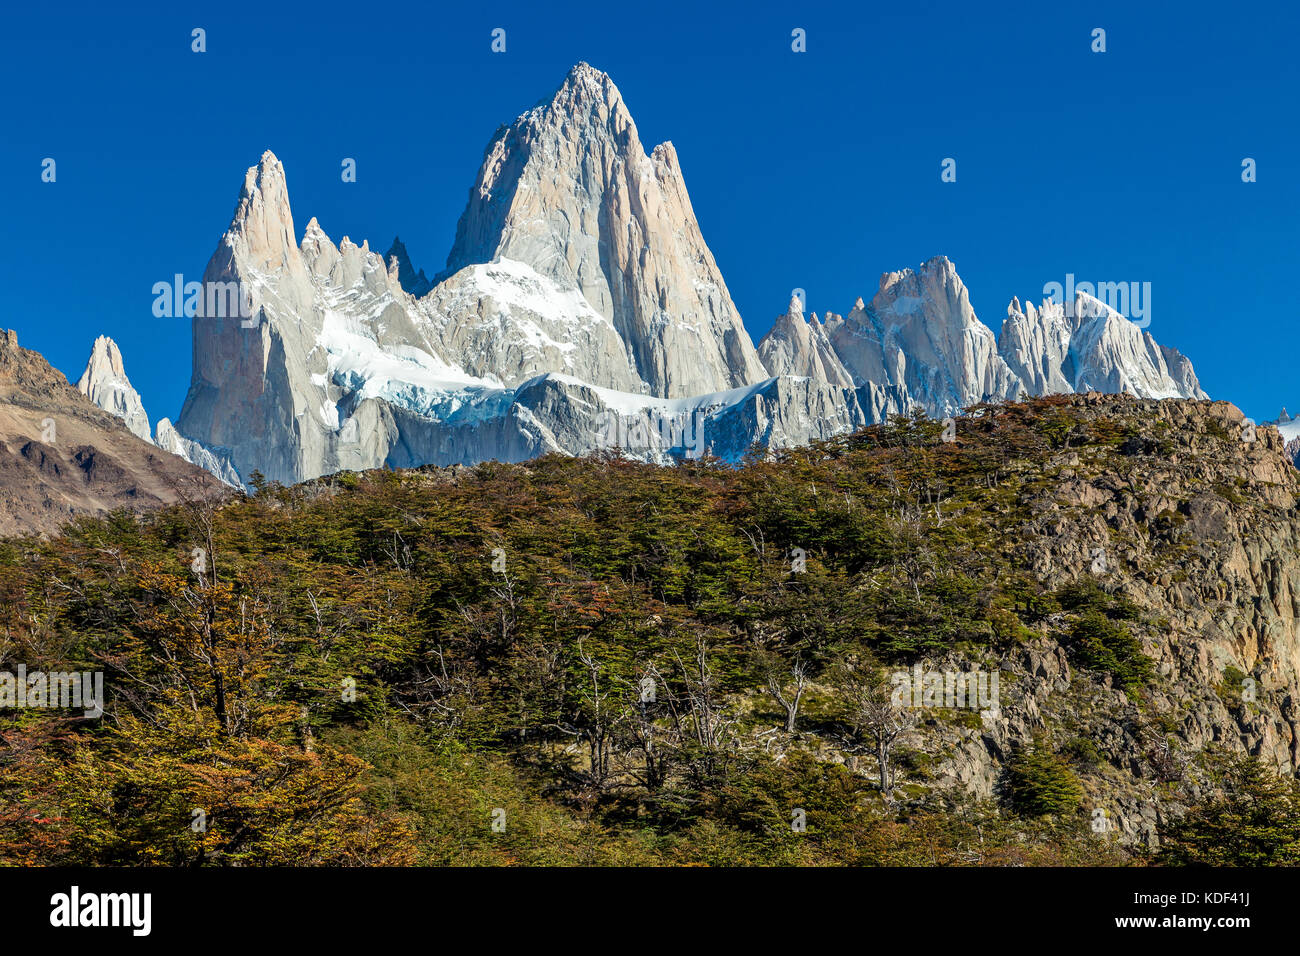 Every hikers dream - Mt Fitz Roy Stock Photo